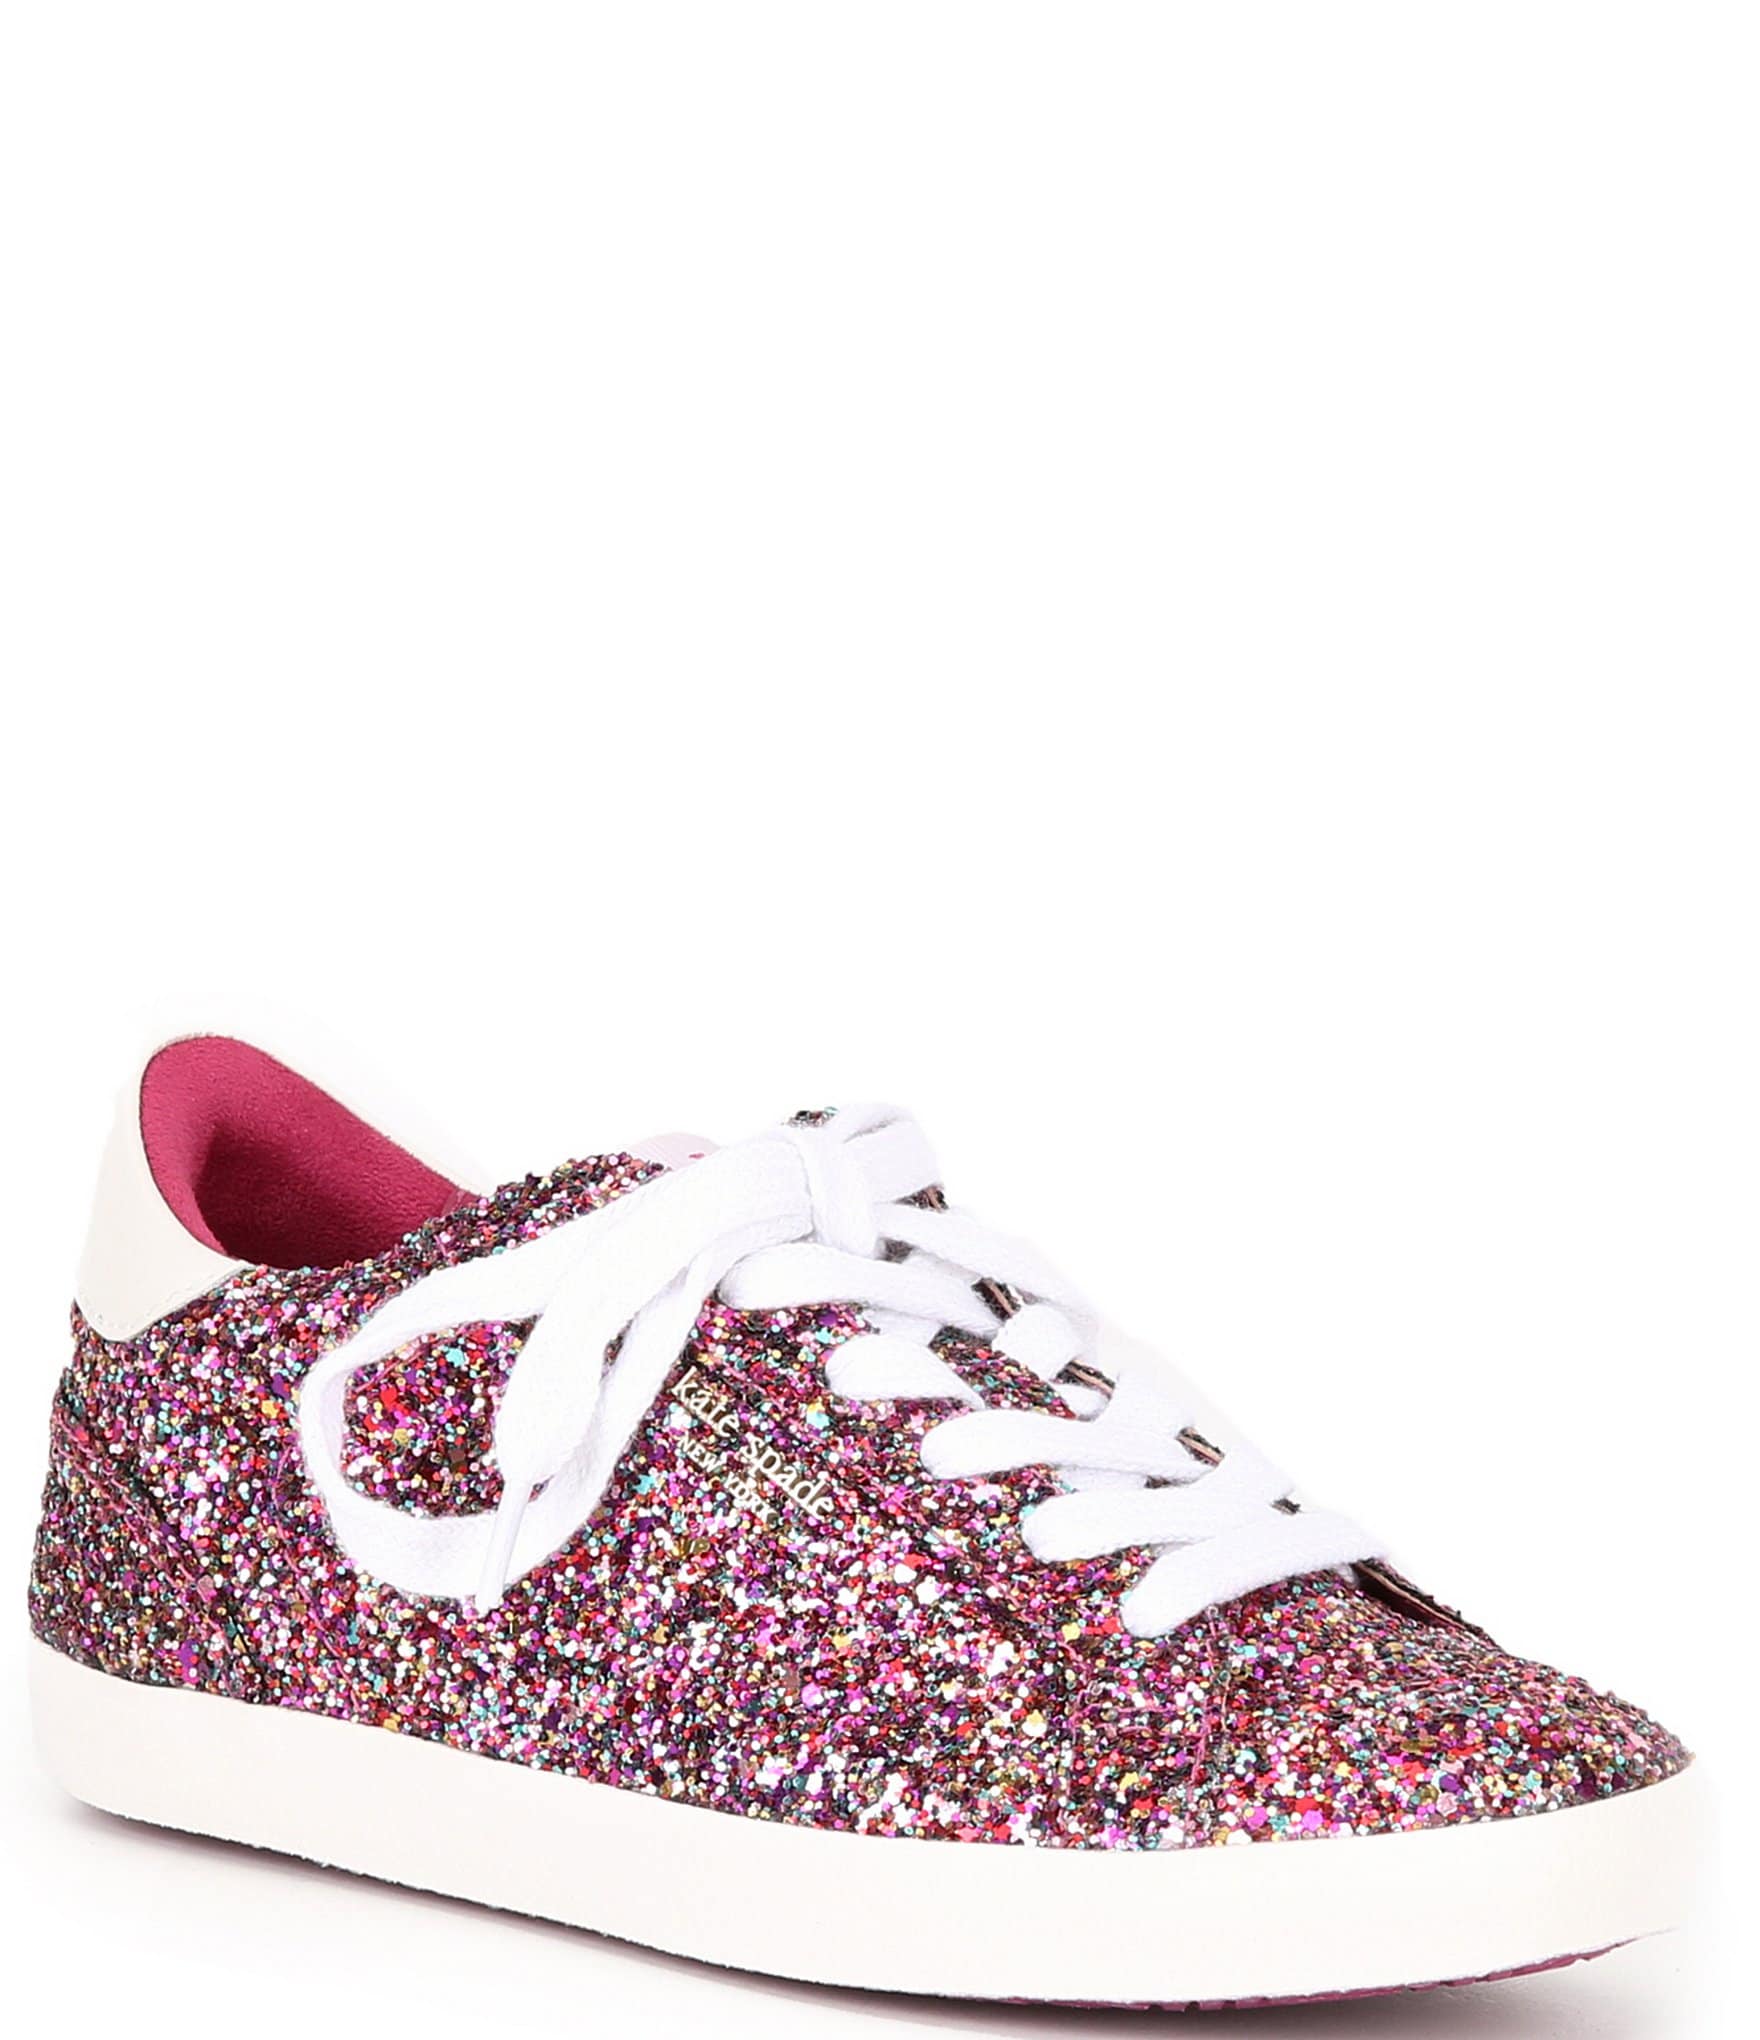 kate spade new york Ace Glitter Lace-Up Sneakers | Dillard's